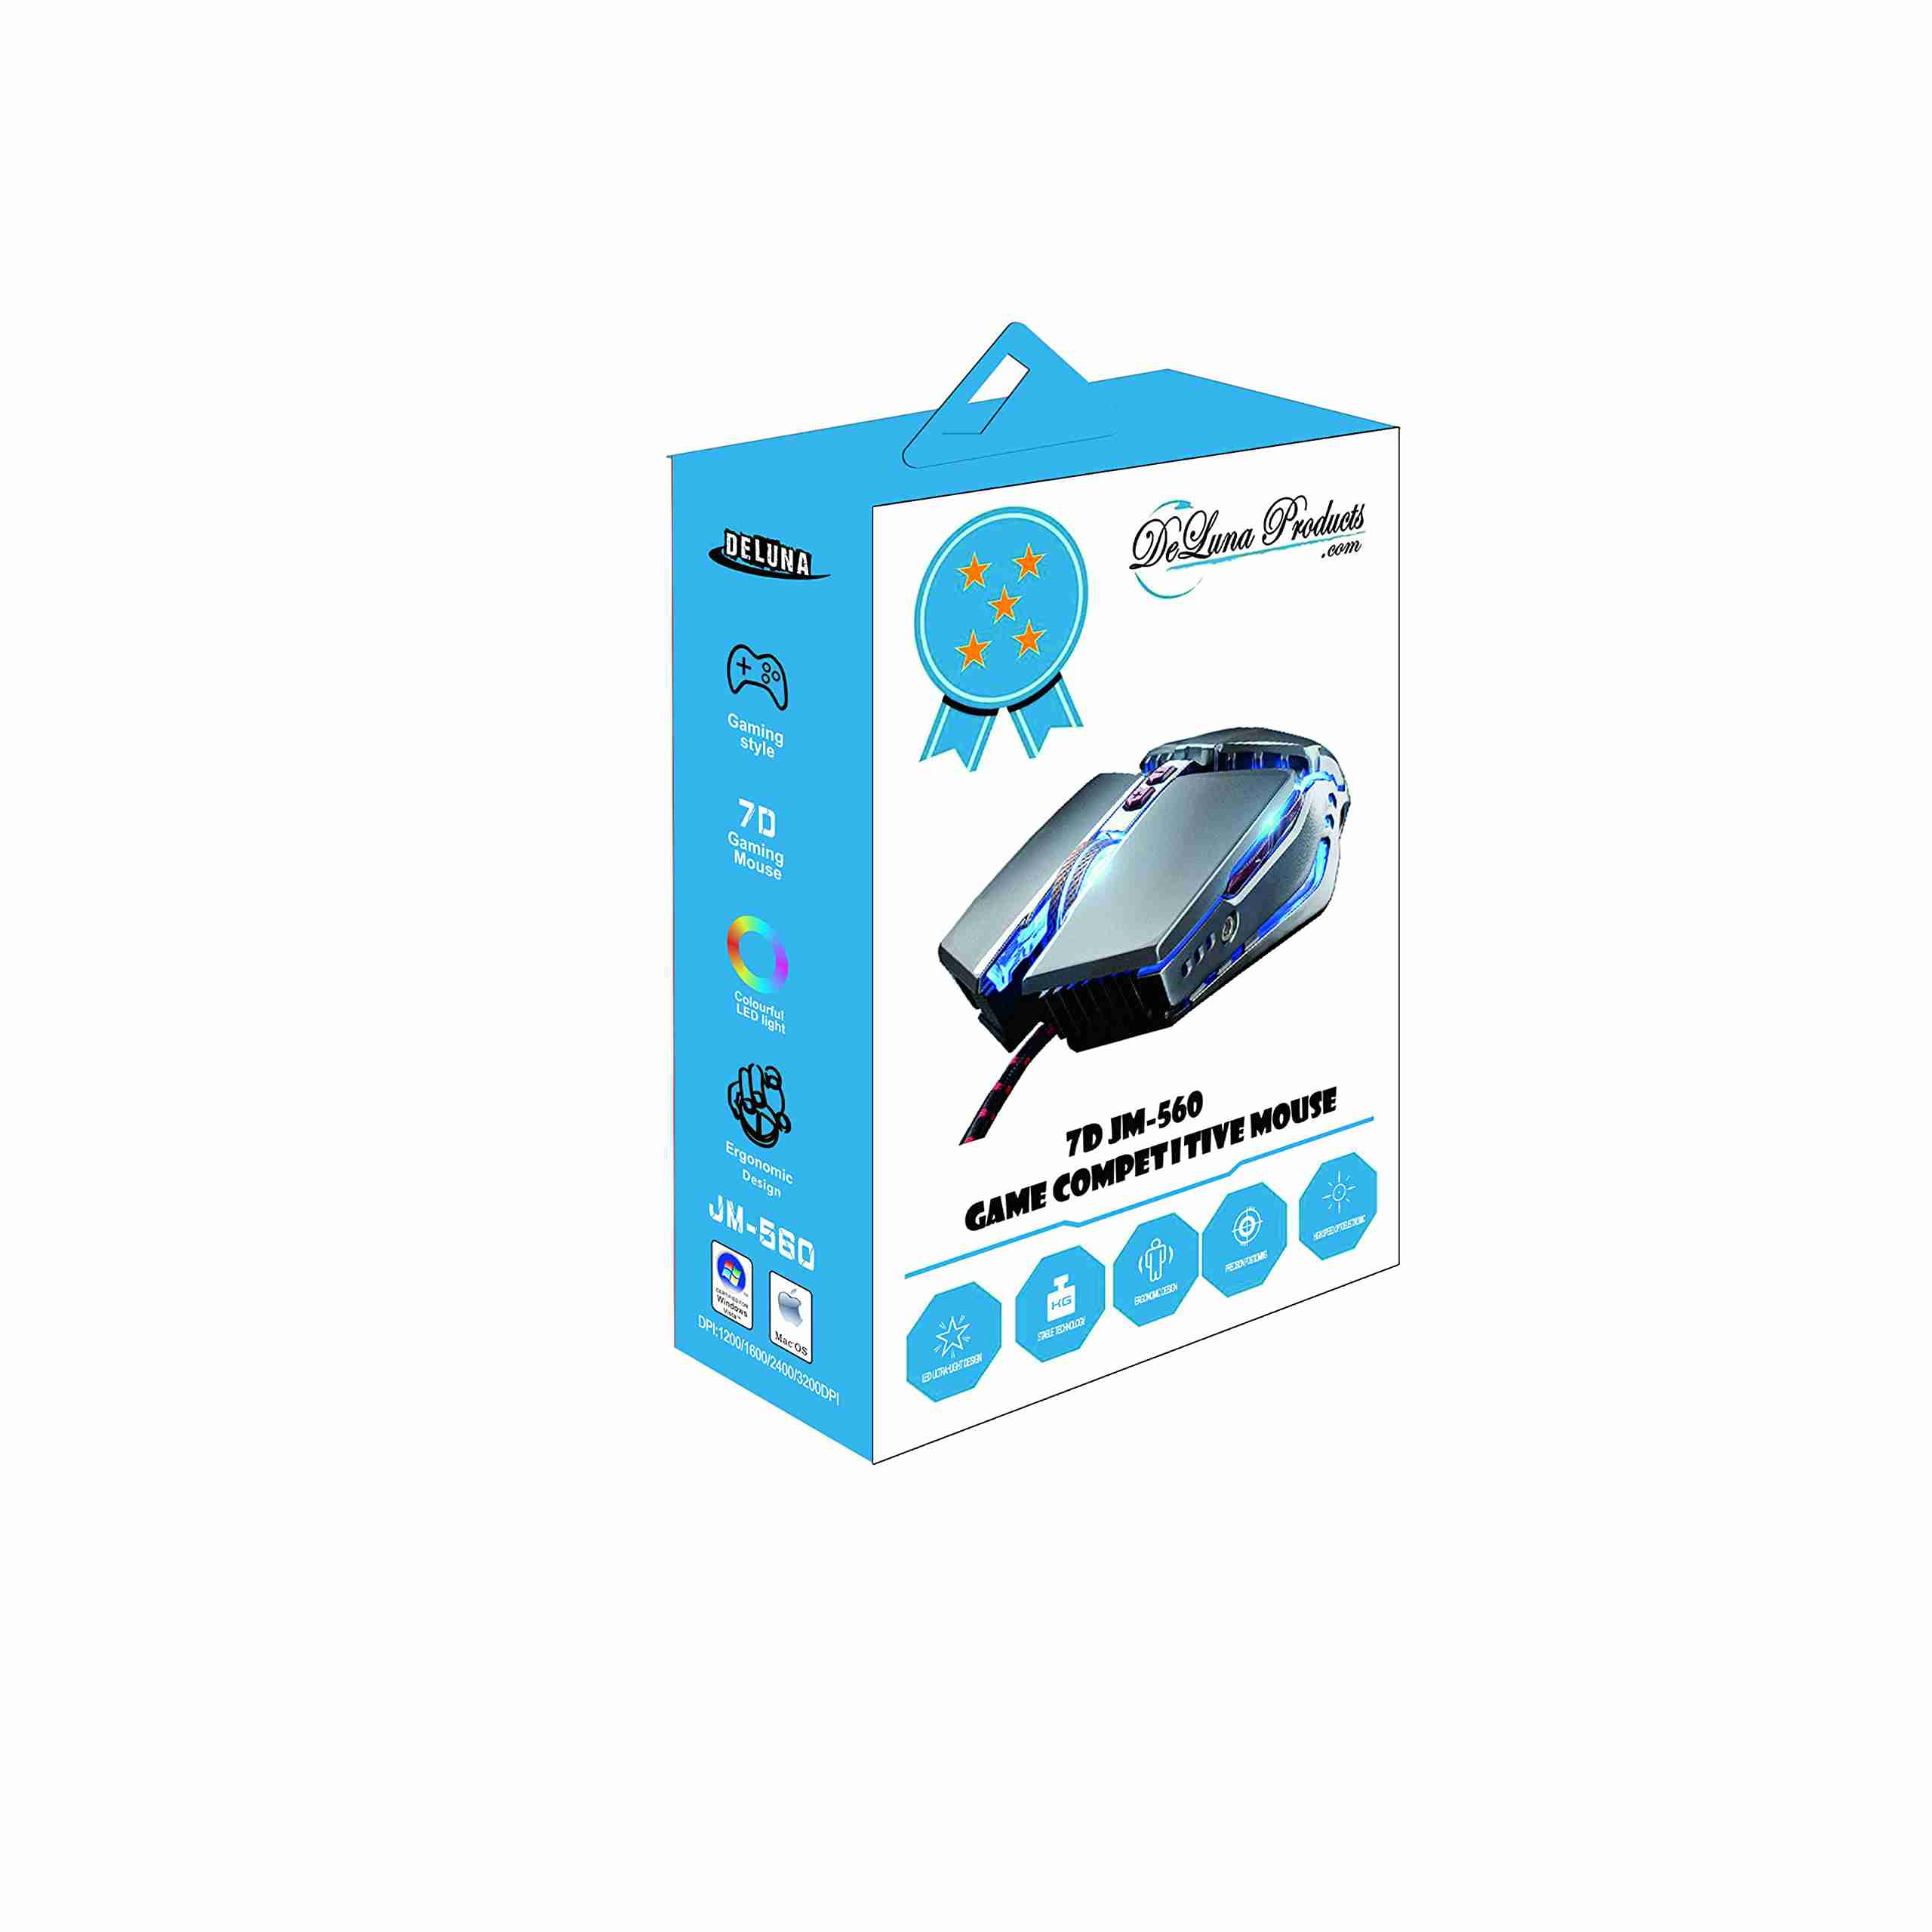 gaming-mouse with cash back rebate